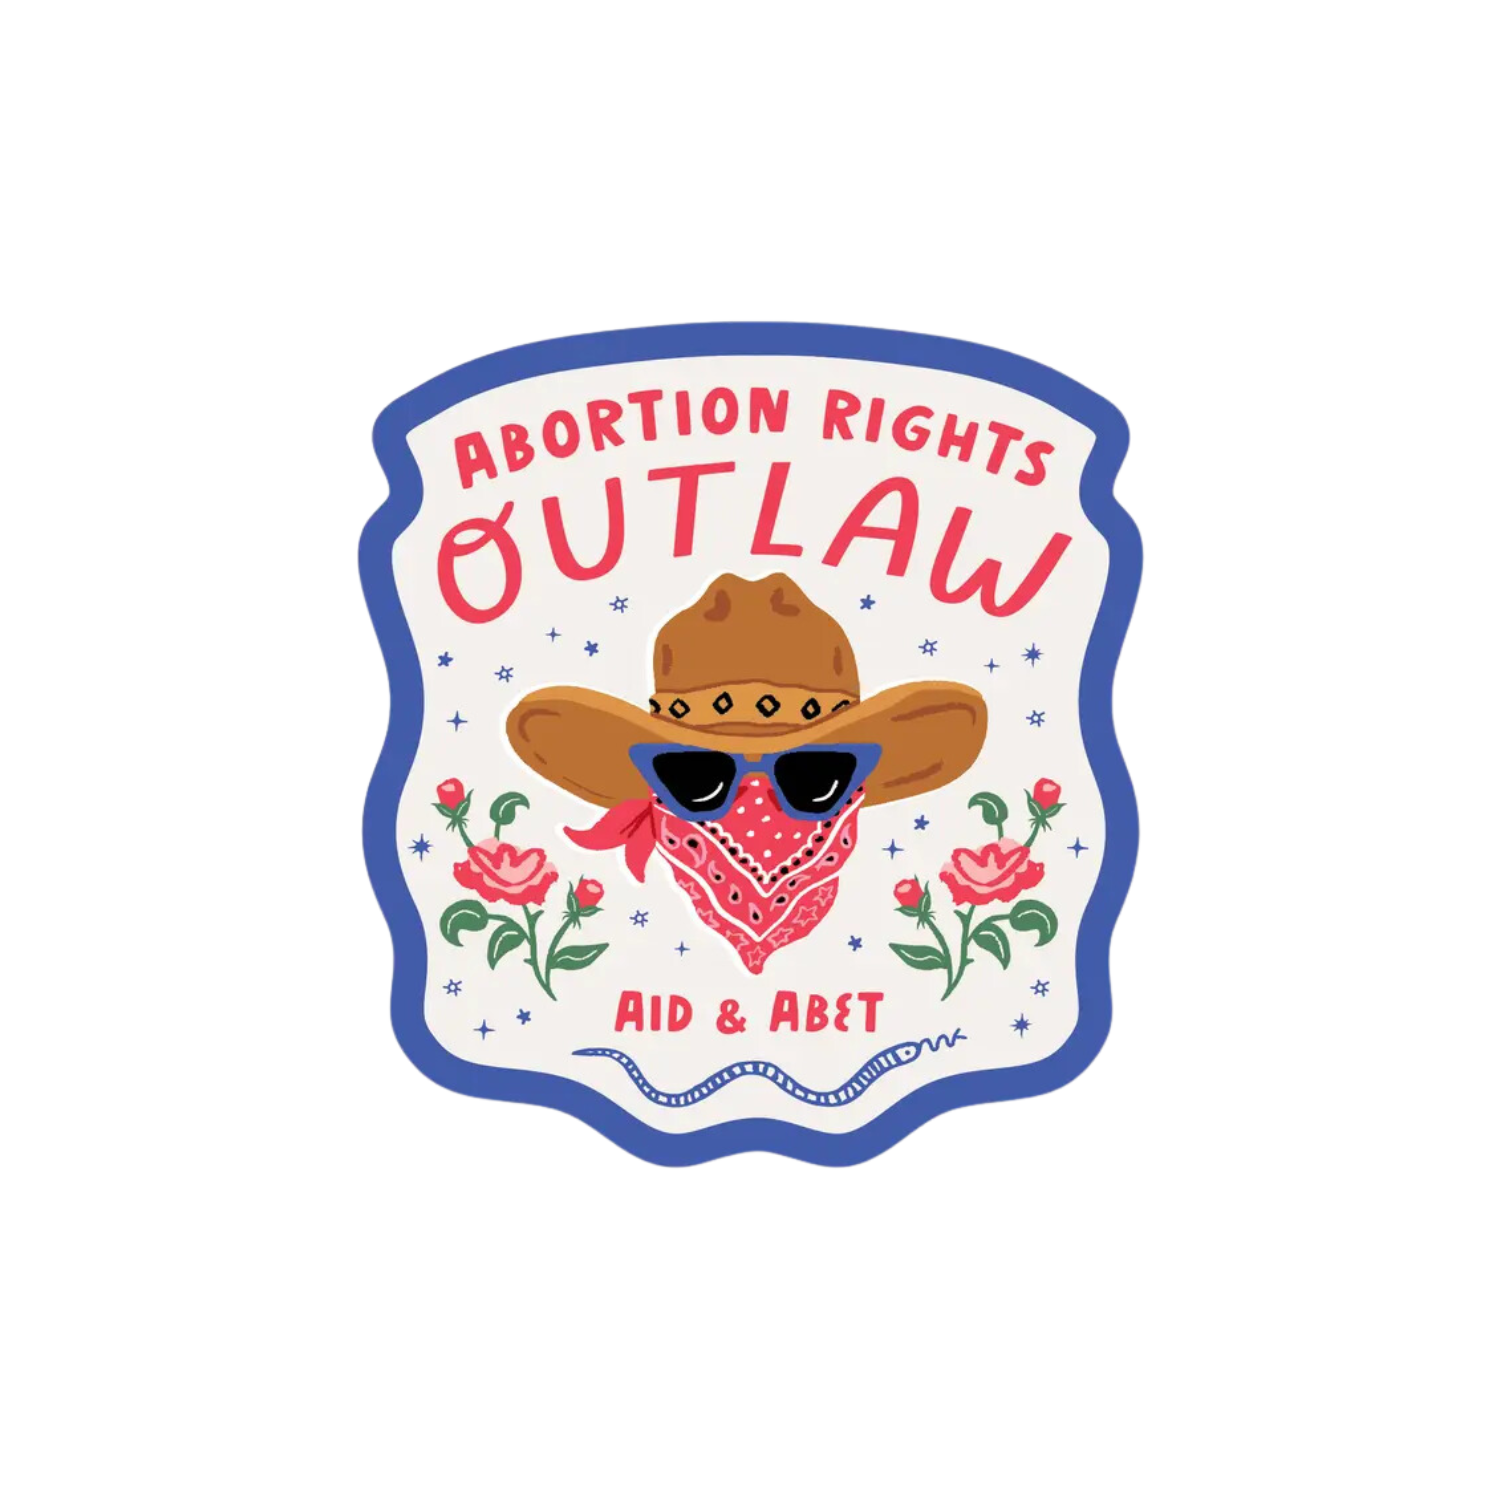 Sticker that reads Abortion Rights Outlaw Aid & Abet, with a cowboy hat with sunglasses and a bandana  next to roses and a blue wavy border